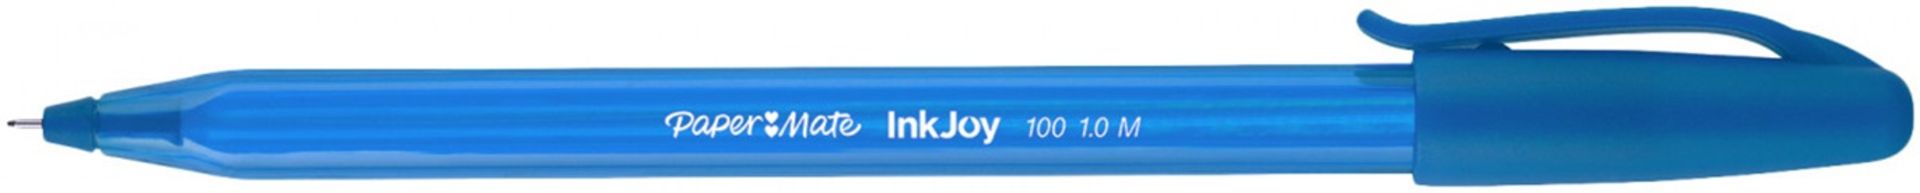 1,000 x Papermate Inkjoy Pens | Total RRP £500 - Image 2 of 2